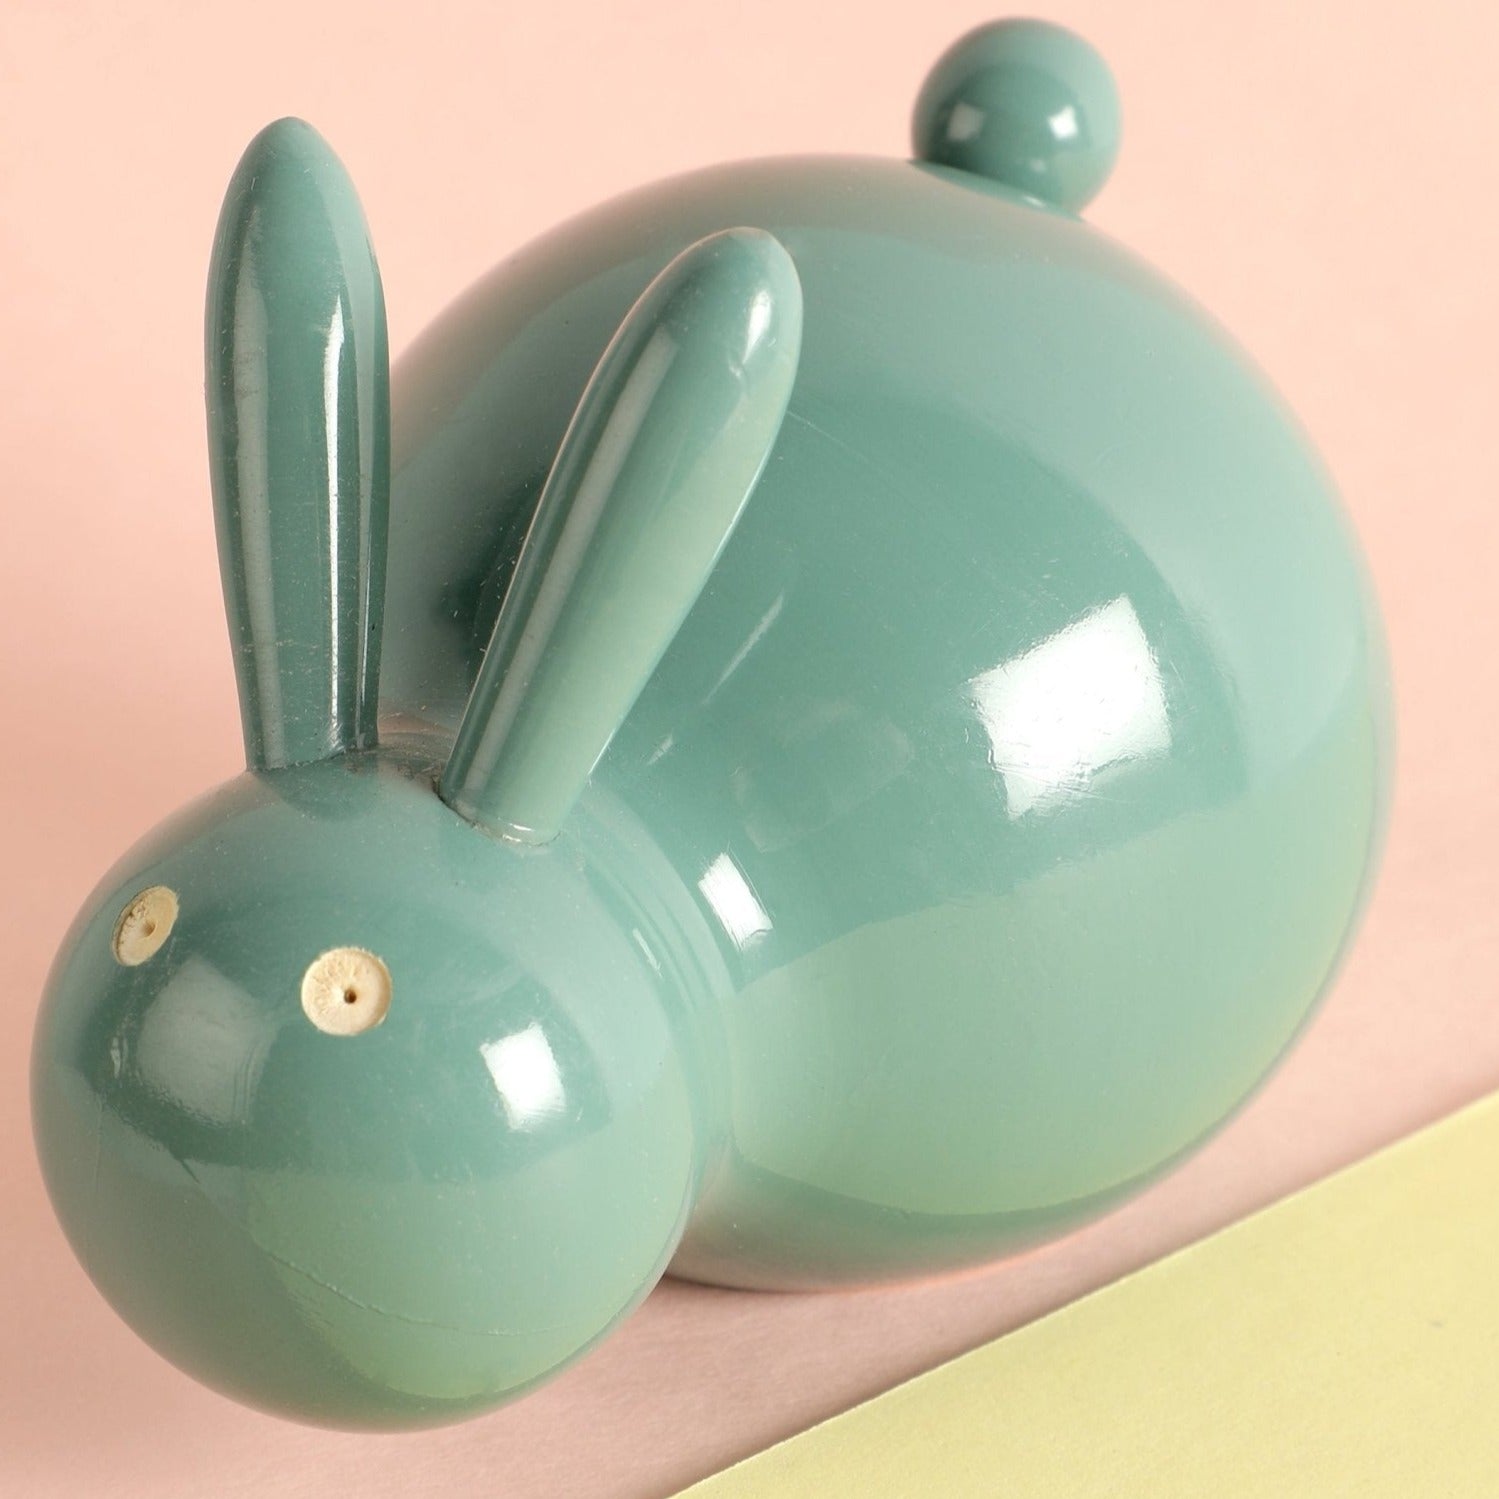 a green ceramic rabbit figurine sitting on a yellow and pink surface